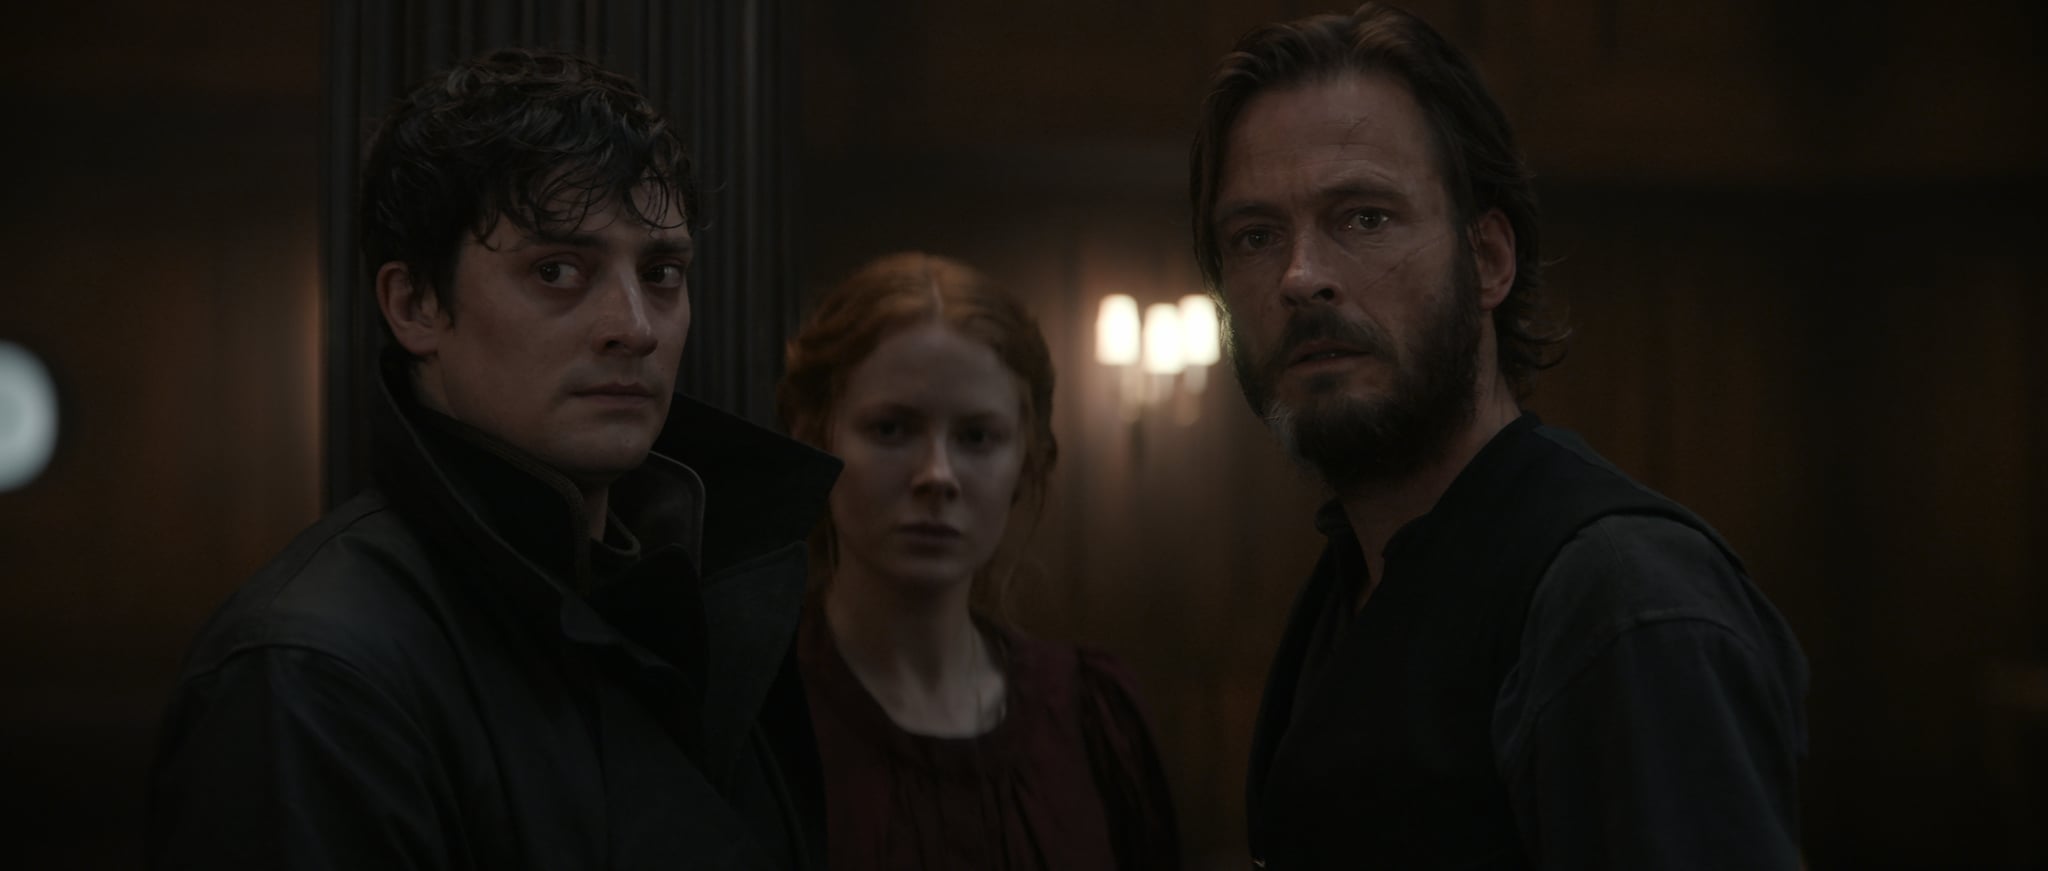 1899 is Netflix's new horror series with inspiration from a true story